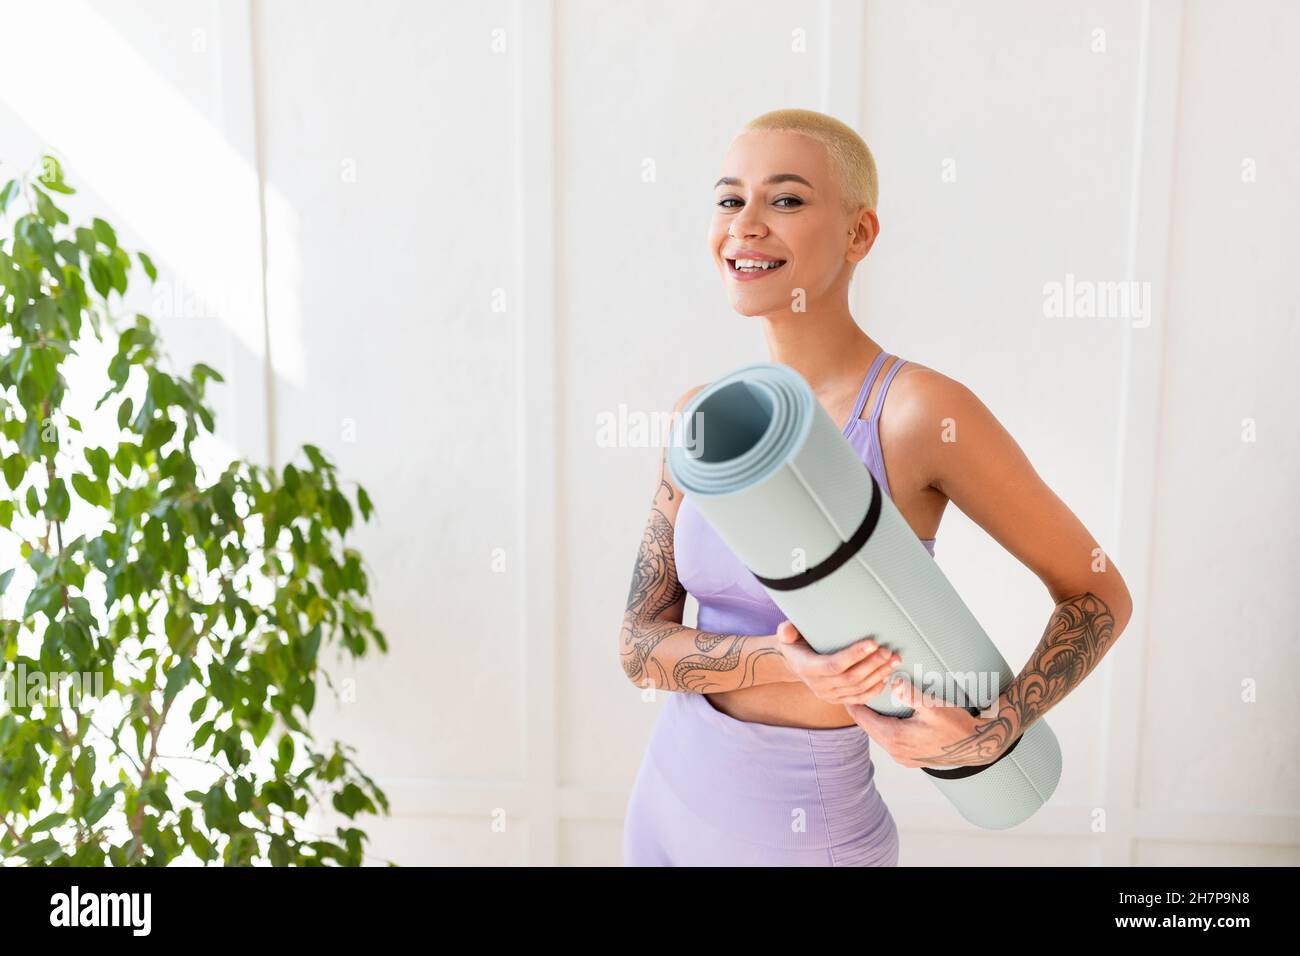 Portrait of positive woman holding yoga mat and smiling at camera while standing against white wall, ready for training Stock Photo